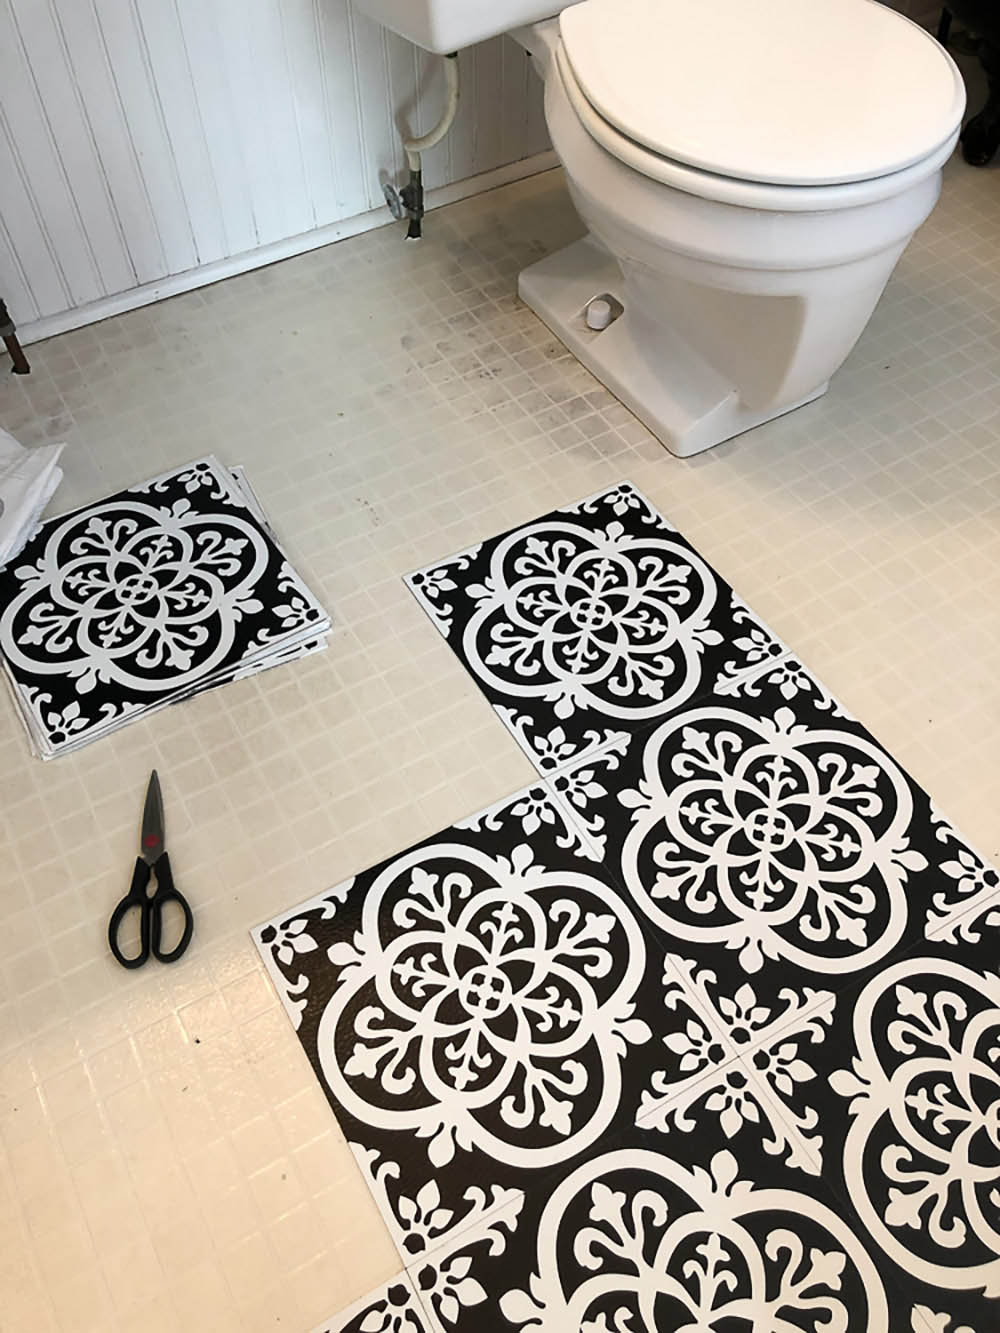 A bathroom floor is covered with white and black peel and stick vinyl floor tiles.